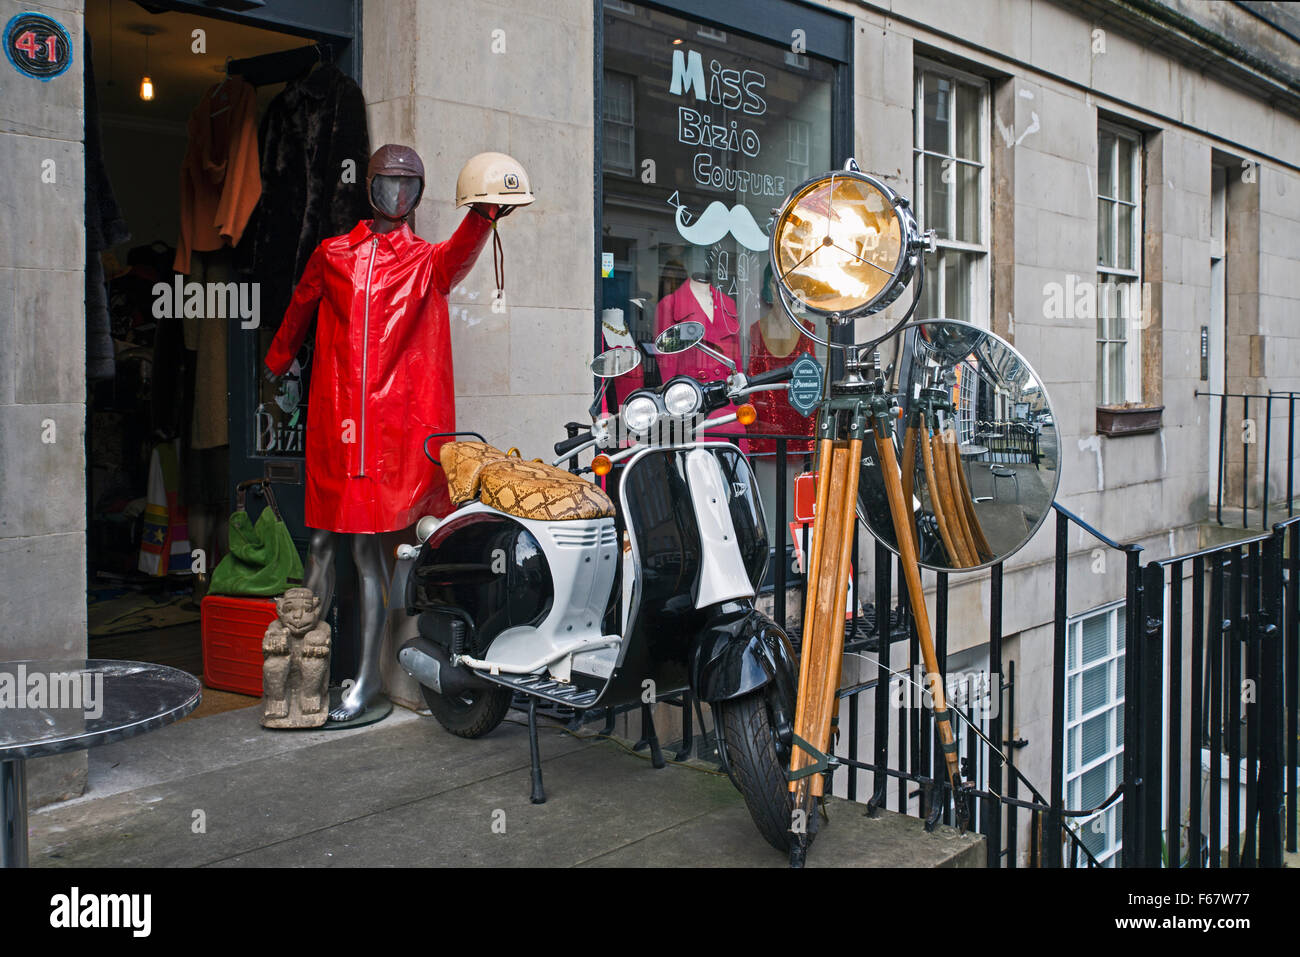 An eclectic display of vintage fashion and objects outside a vintage clothes shop on St Stephen Street, Edinburgh, Scotland, UK. Stock Photo